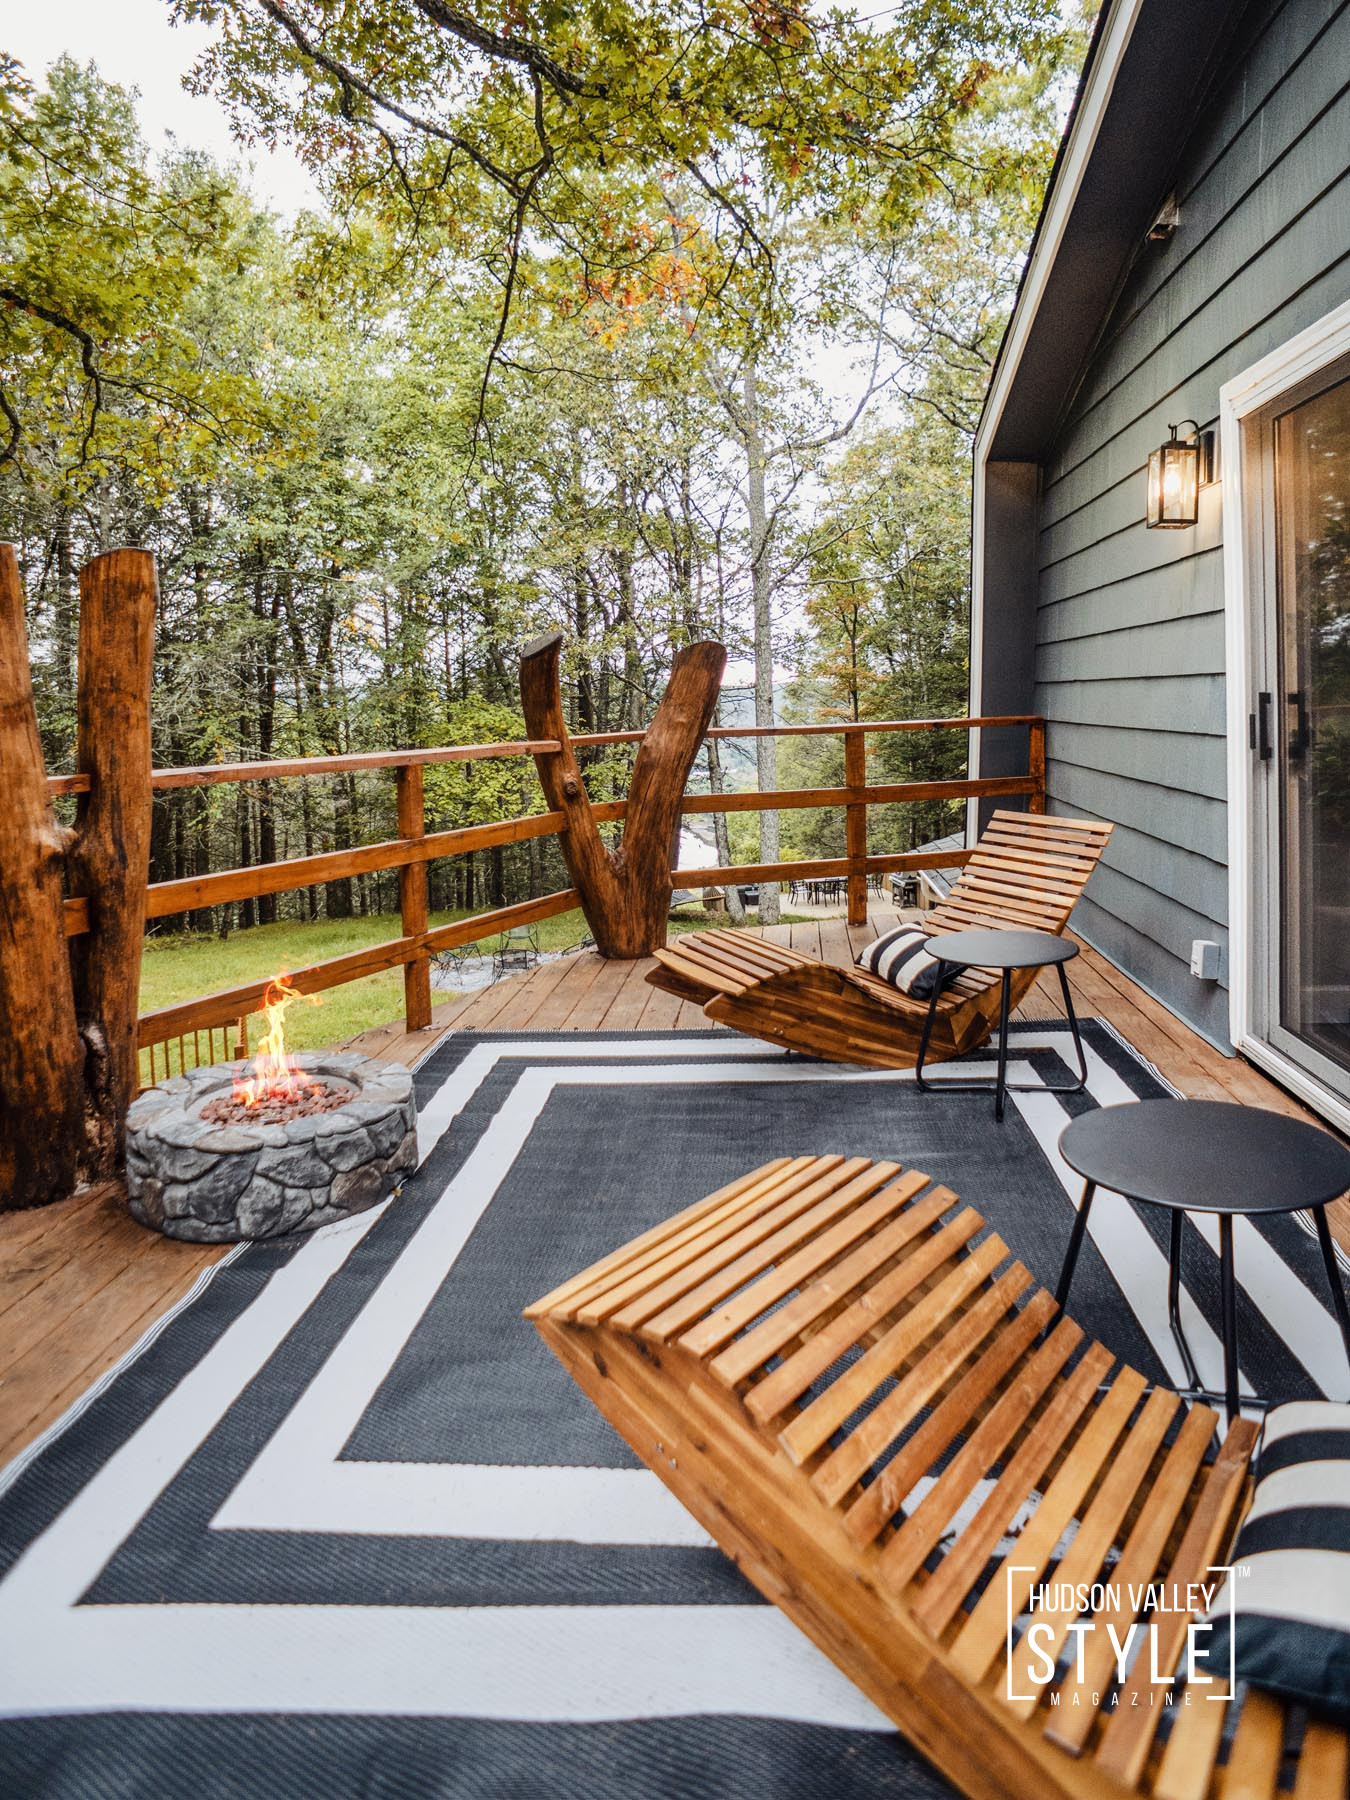 Getaway to the Catskills: Unwind at Rivers Ledge for Magnificent River Views – Airbnb Review by Photographer Maxwell Alexander for ALLUVION MEDIA